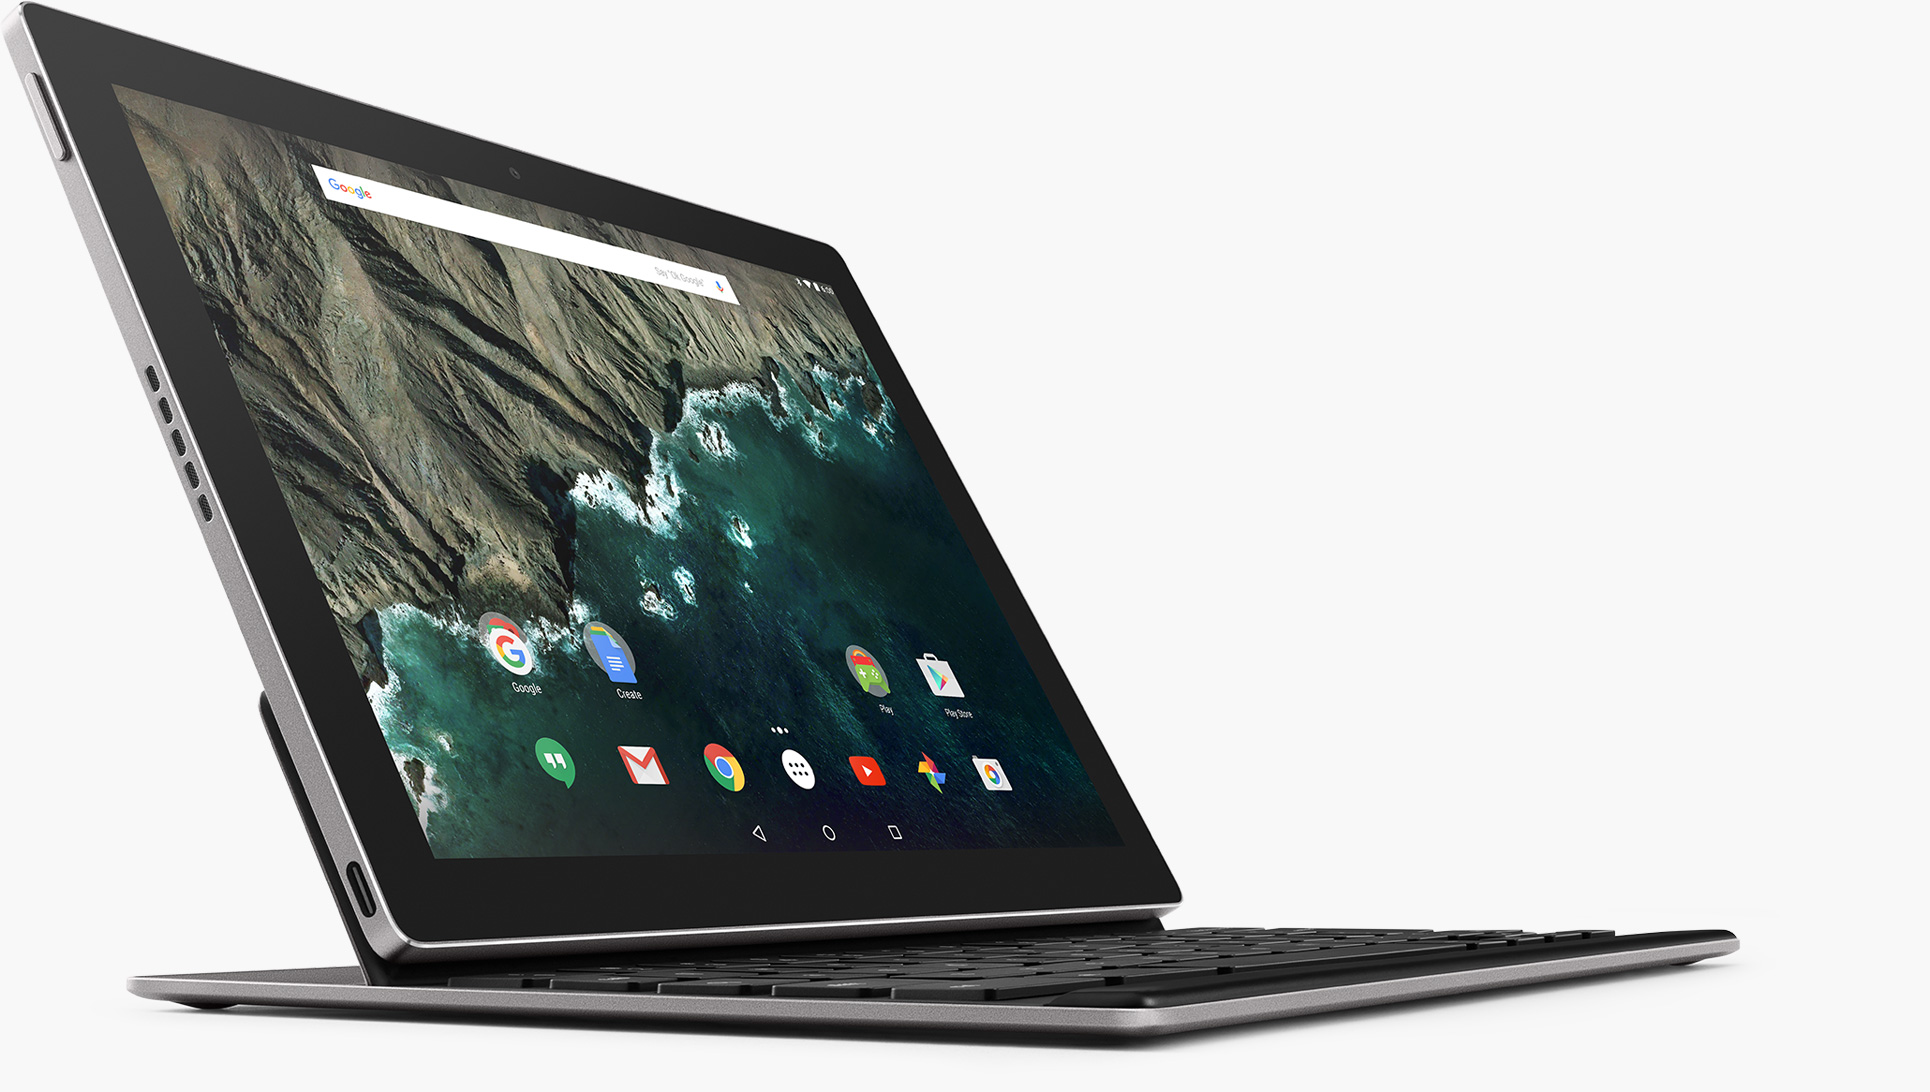 Google Pixel C is a flagship Android tablet